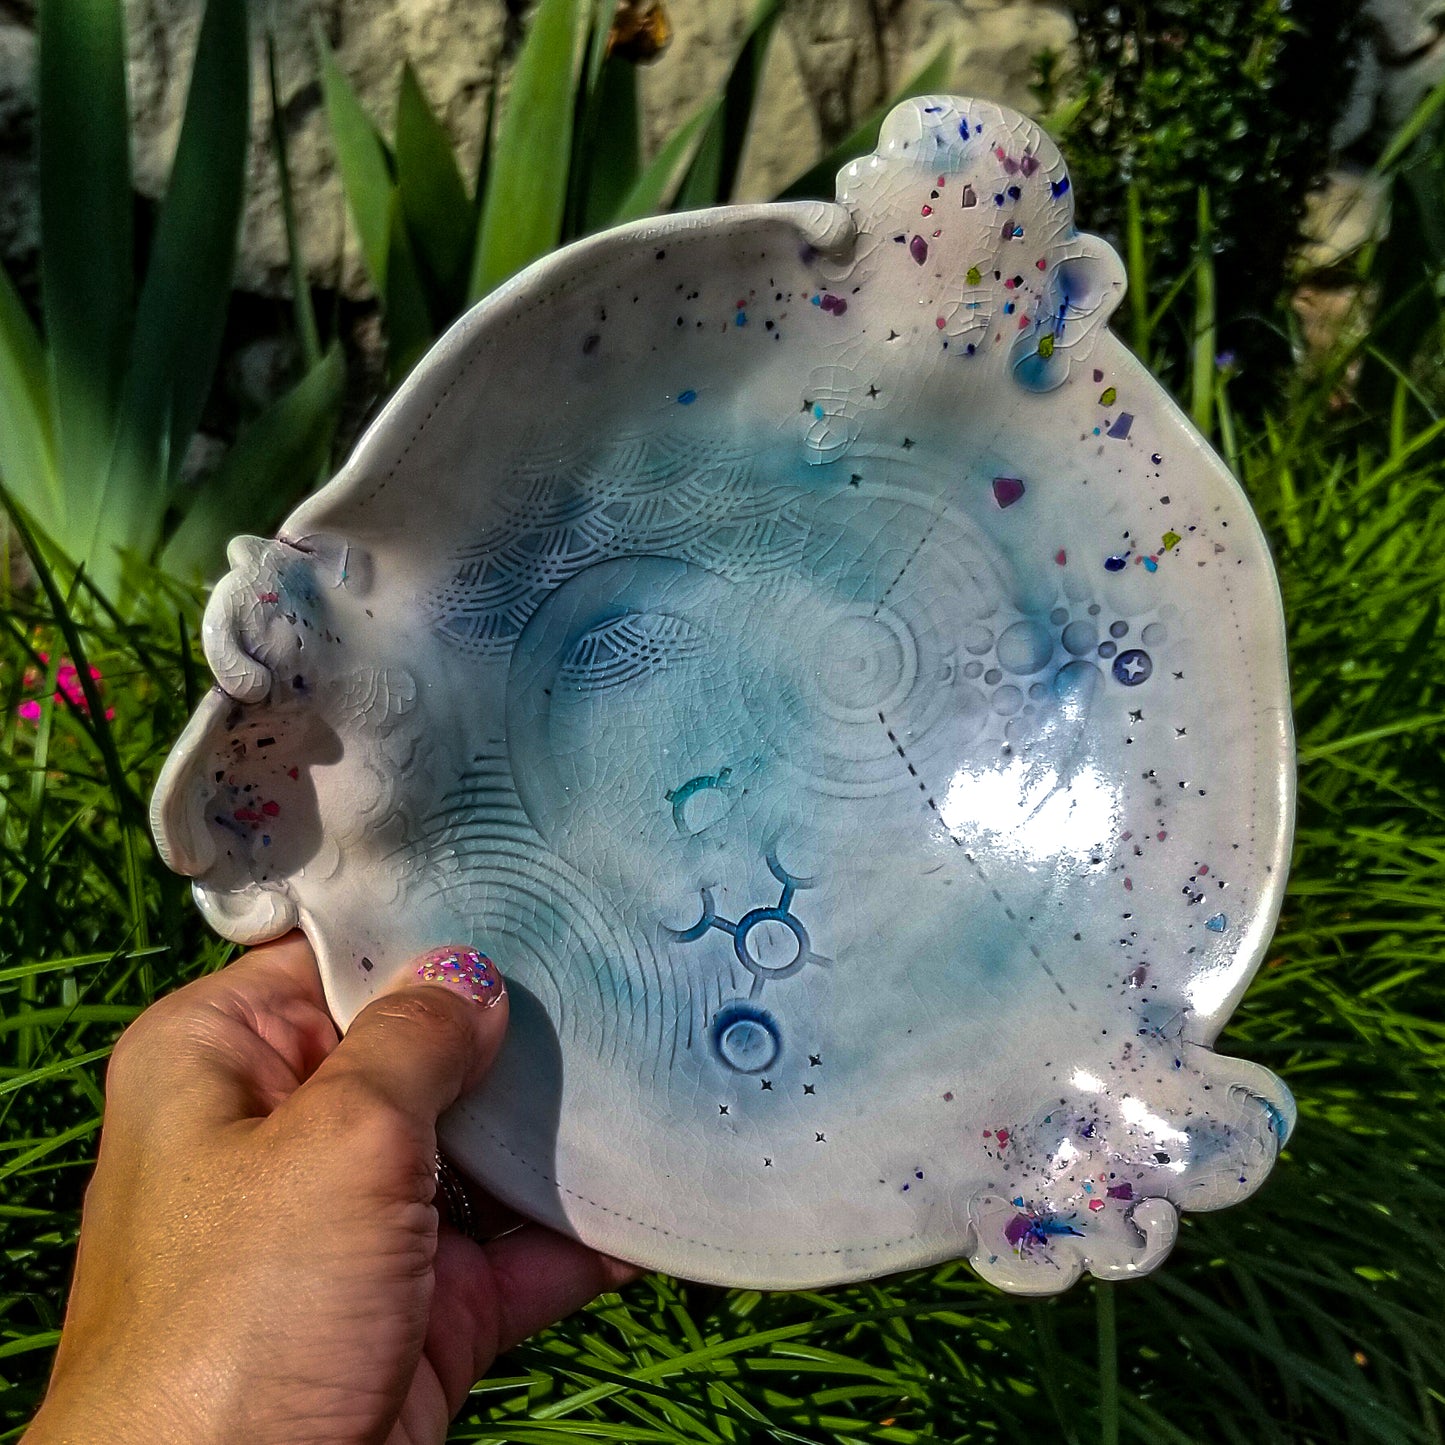 Handmade ceramic soda fired dish multi color with pressed textures